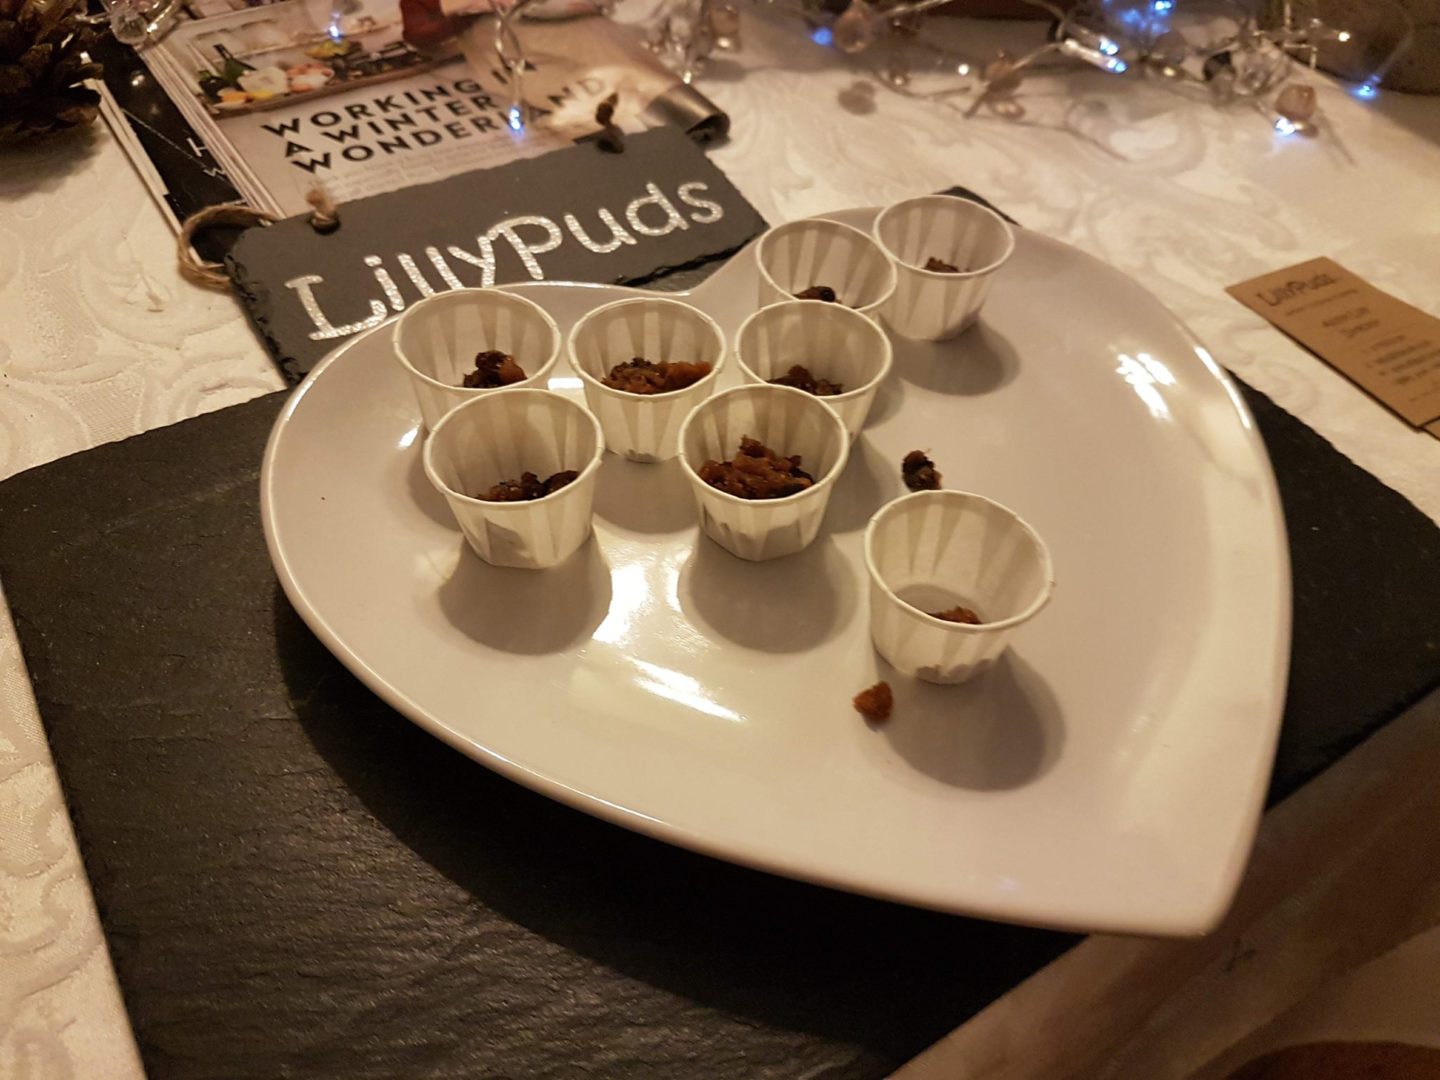 LillyPuds Christmas pudding samples